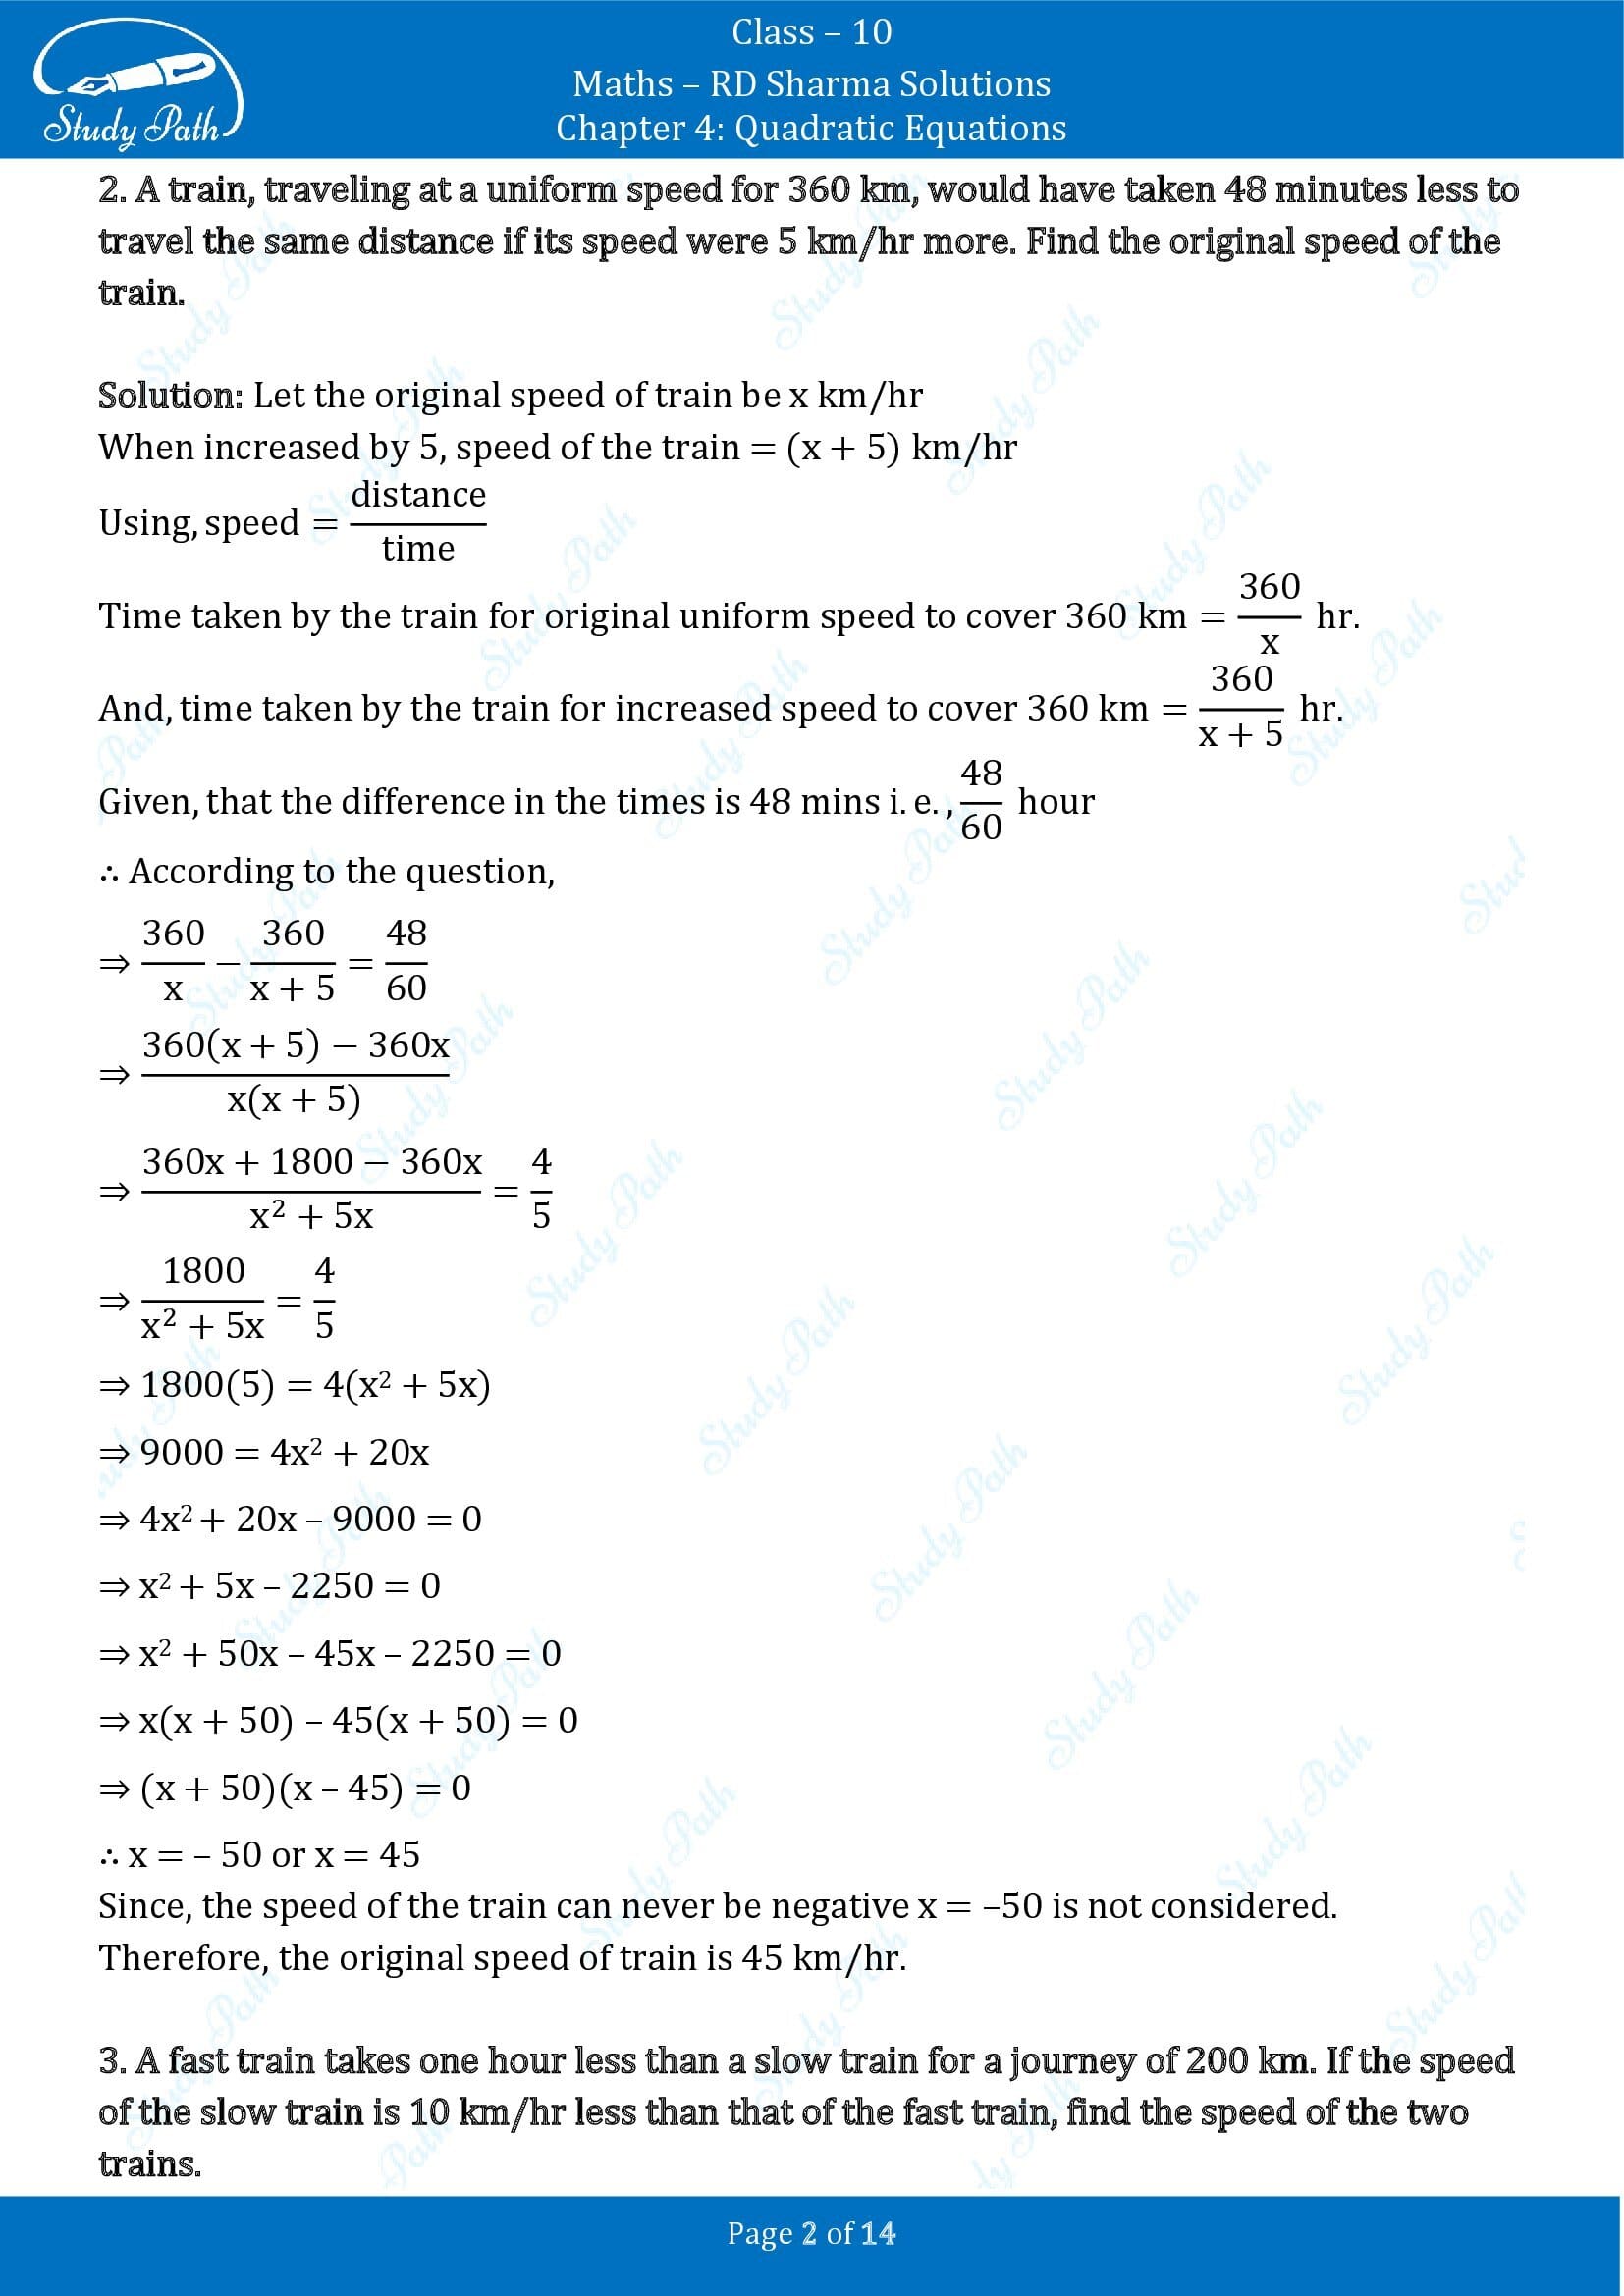 RD Sharma Solutions Class 10 Chapter 4 Quadratic Equations Exercise 4.8 00002